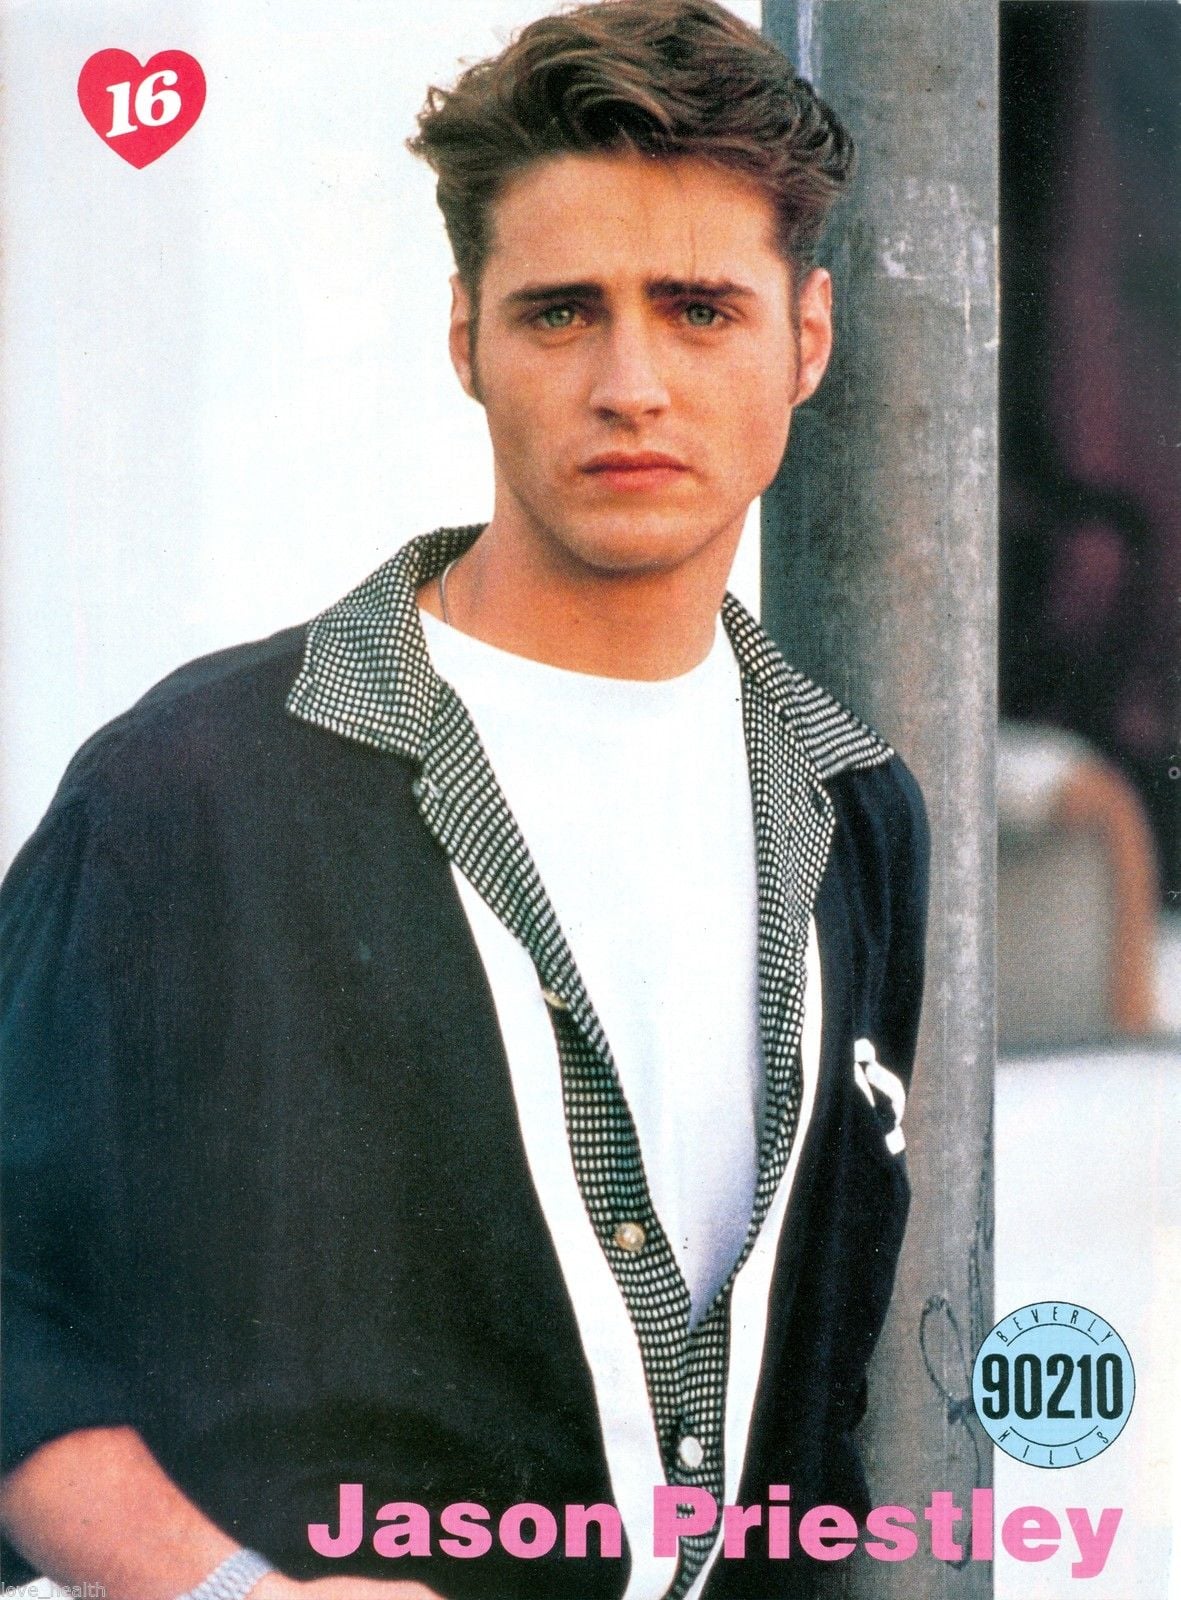 Jason Priestley 25 Heartthrob Posters From the '90s You'll Totally